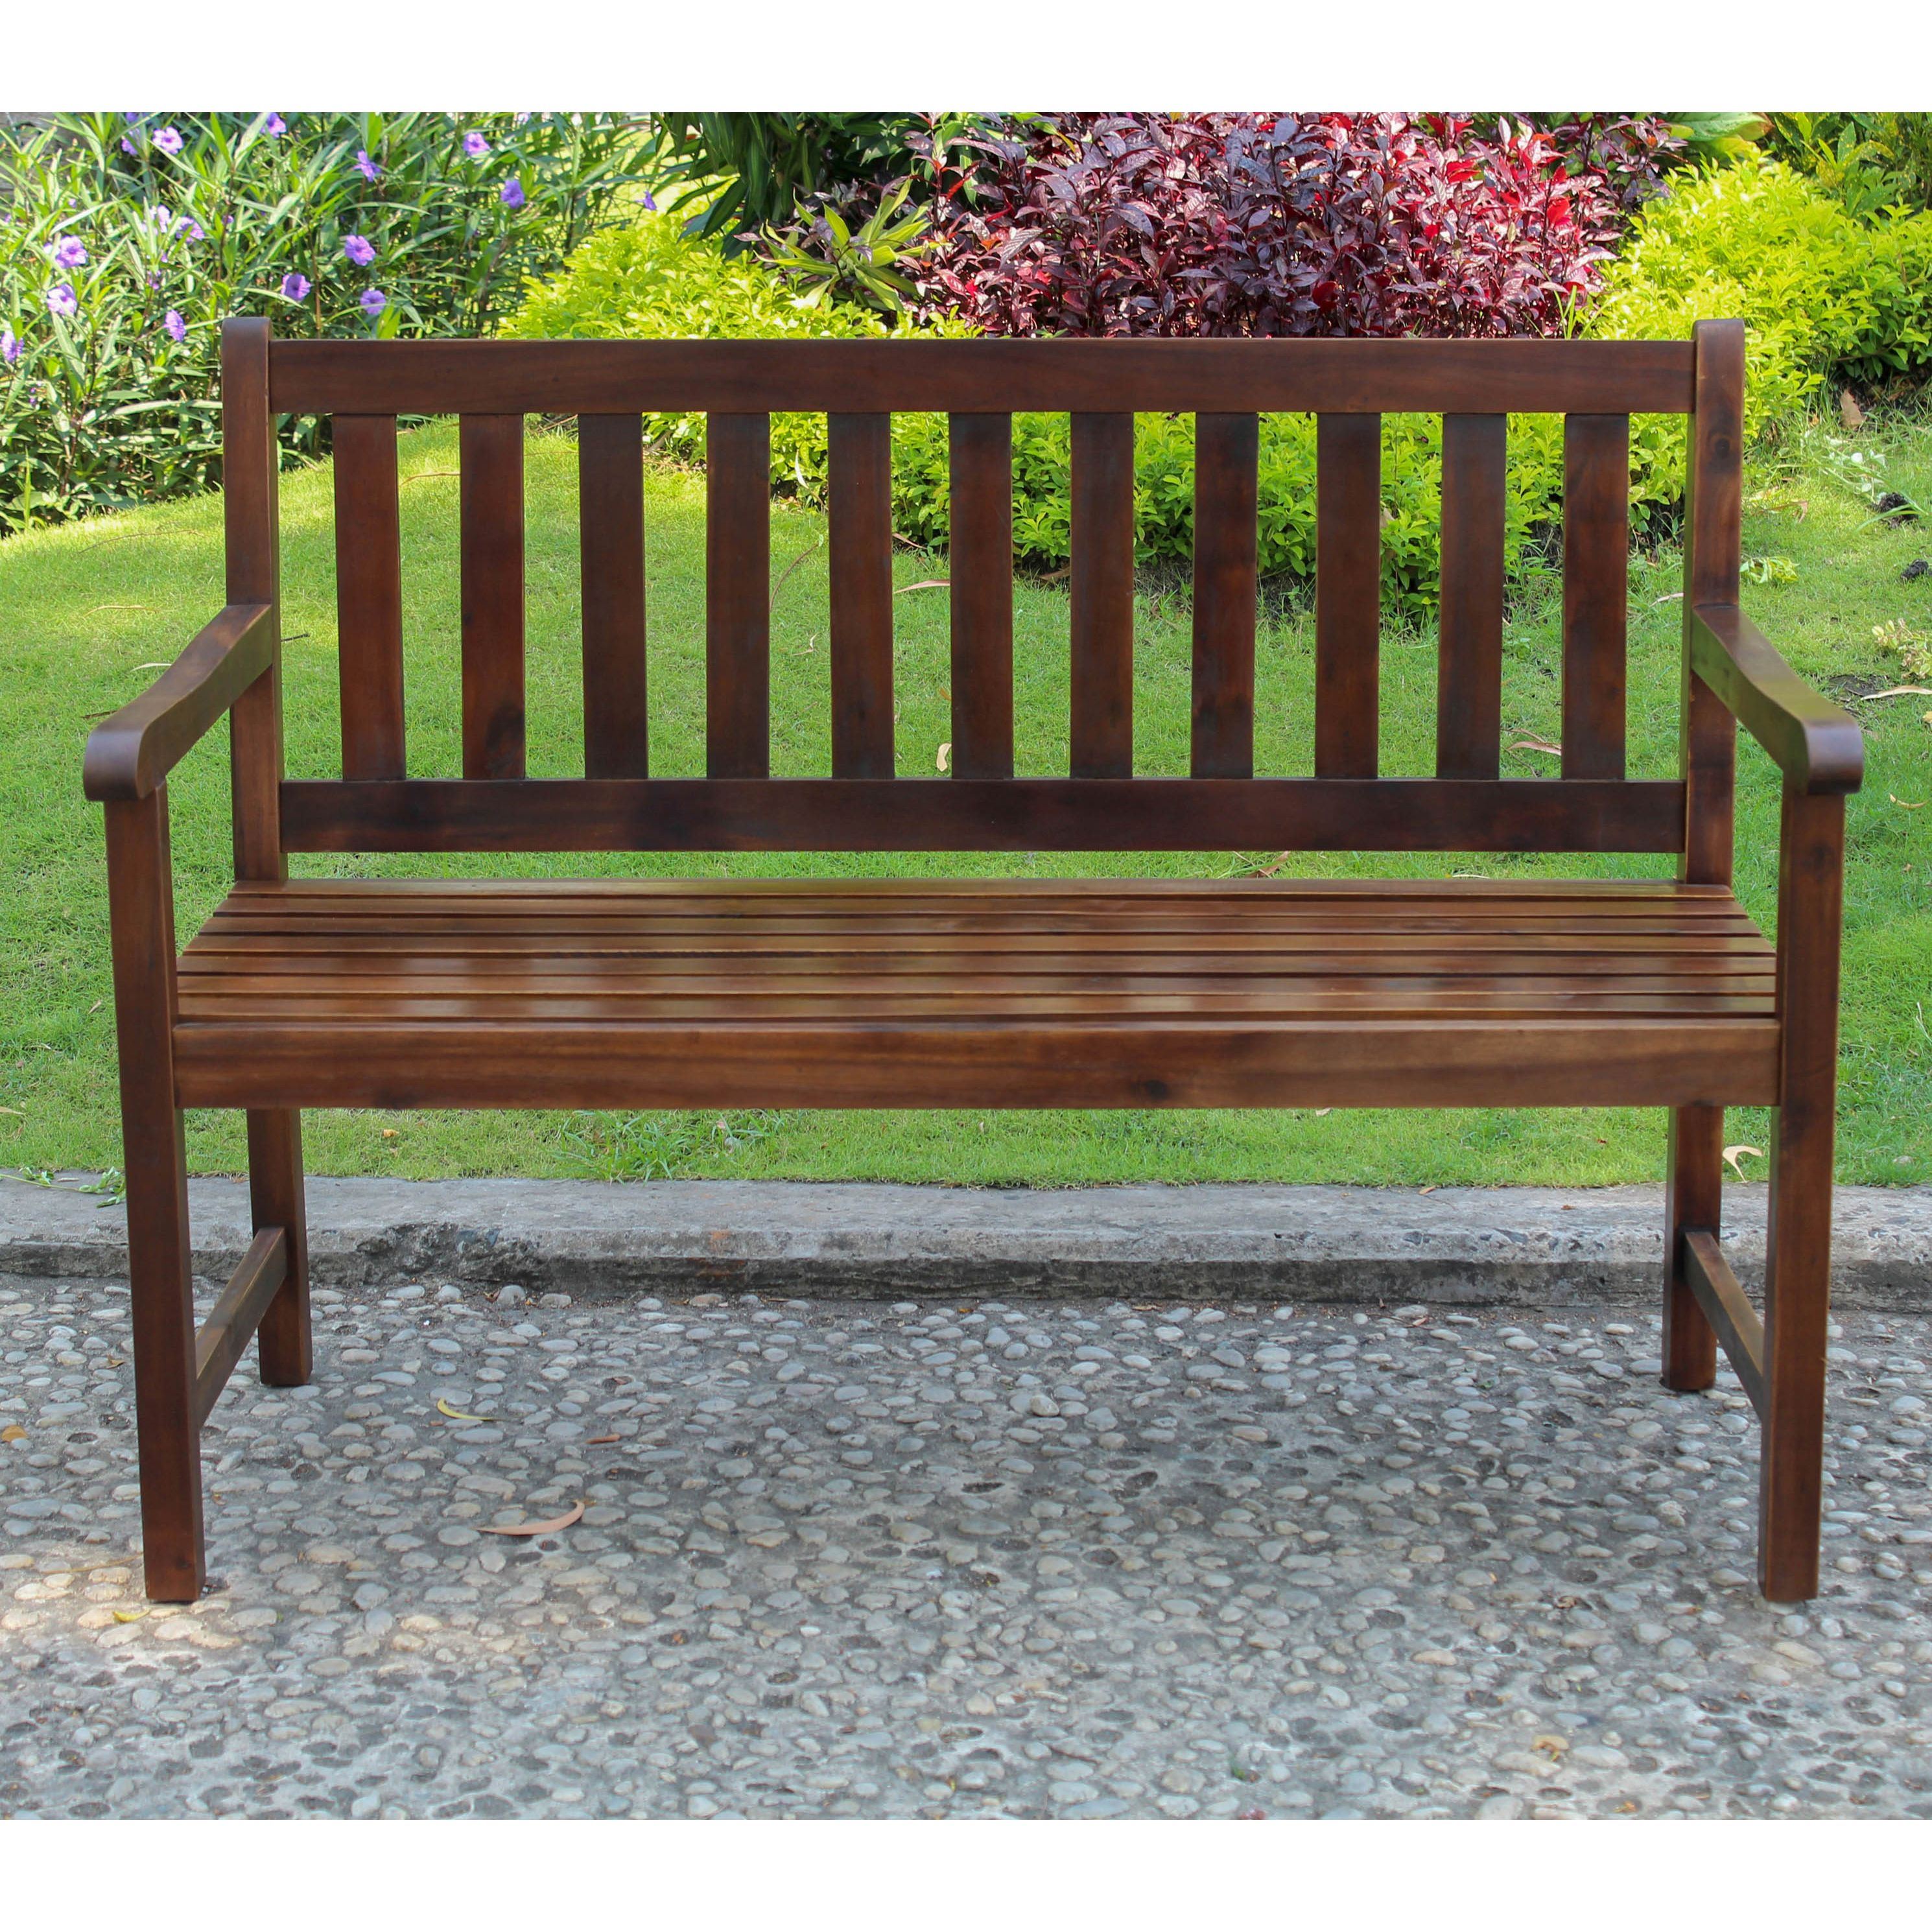 International Caravan Highland Acacia Stain 48.25 in. Patio Park Bench - image 3 of 3